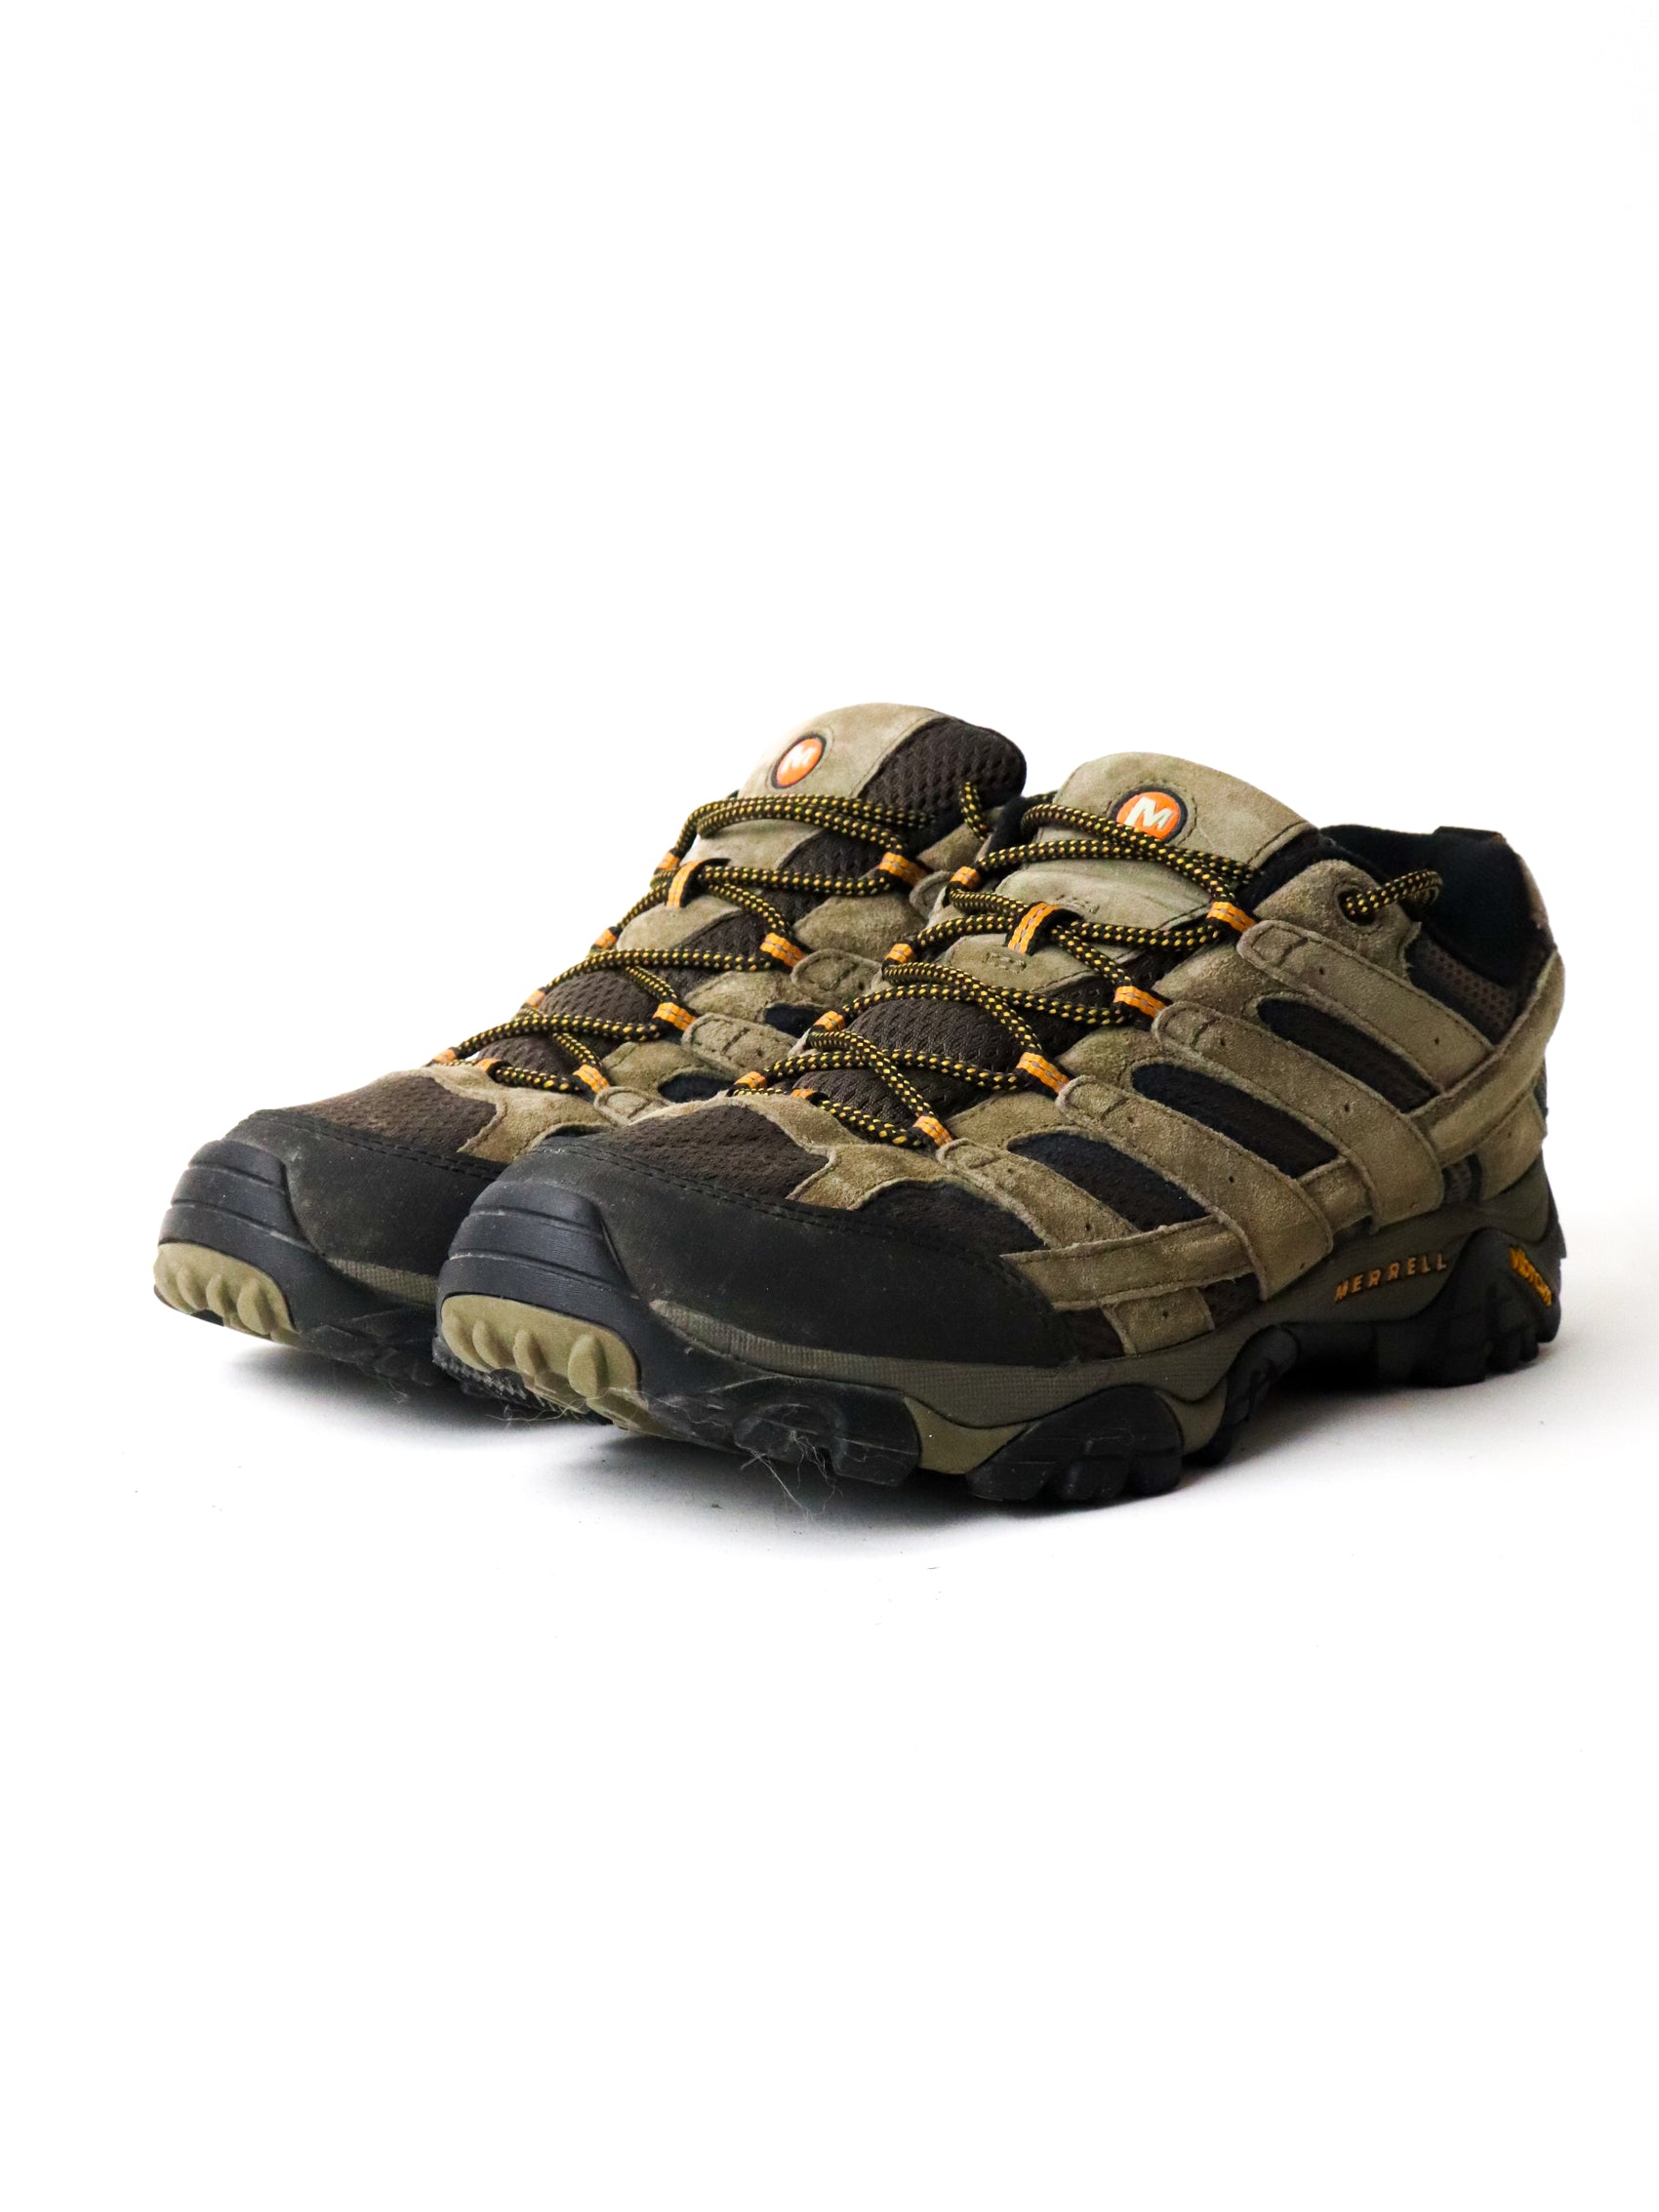 Merrell Moab 2 Vent Mens 12 Brown Hiking Outdoors